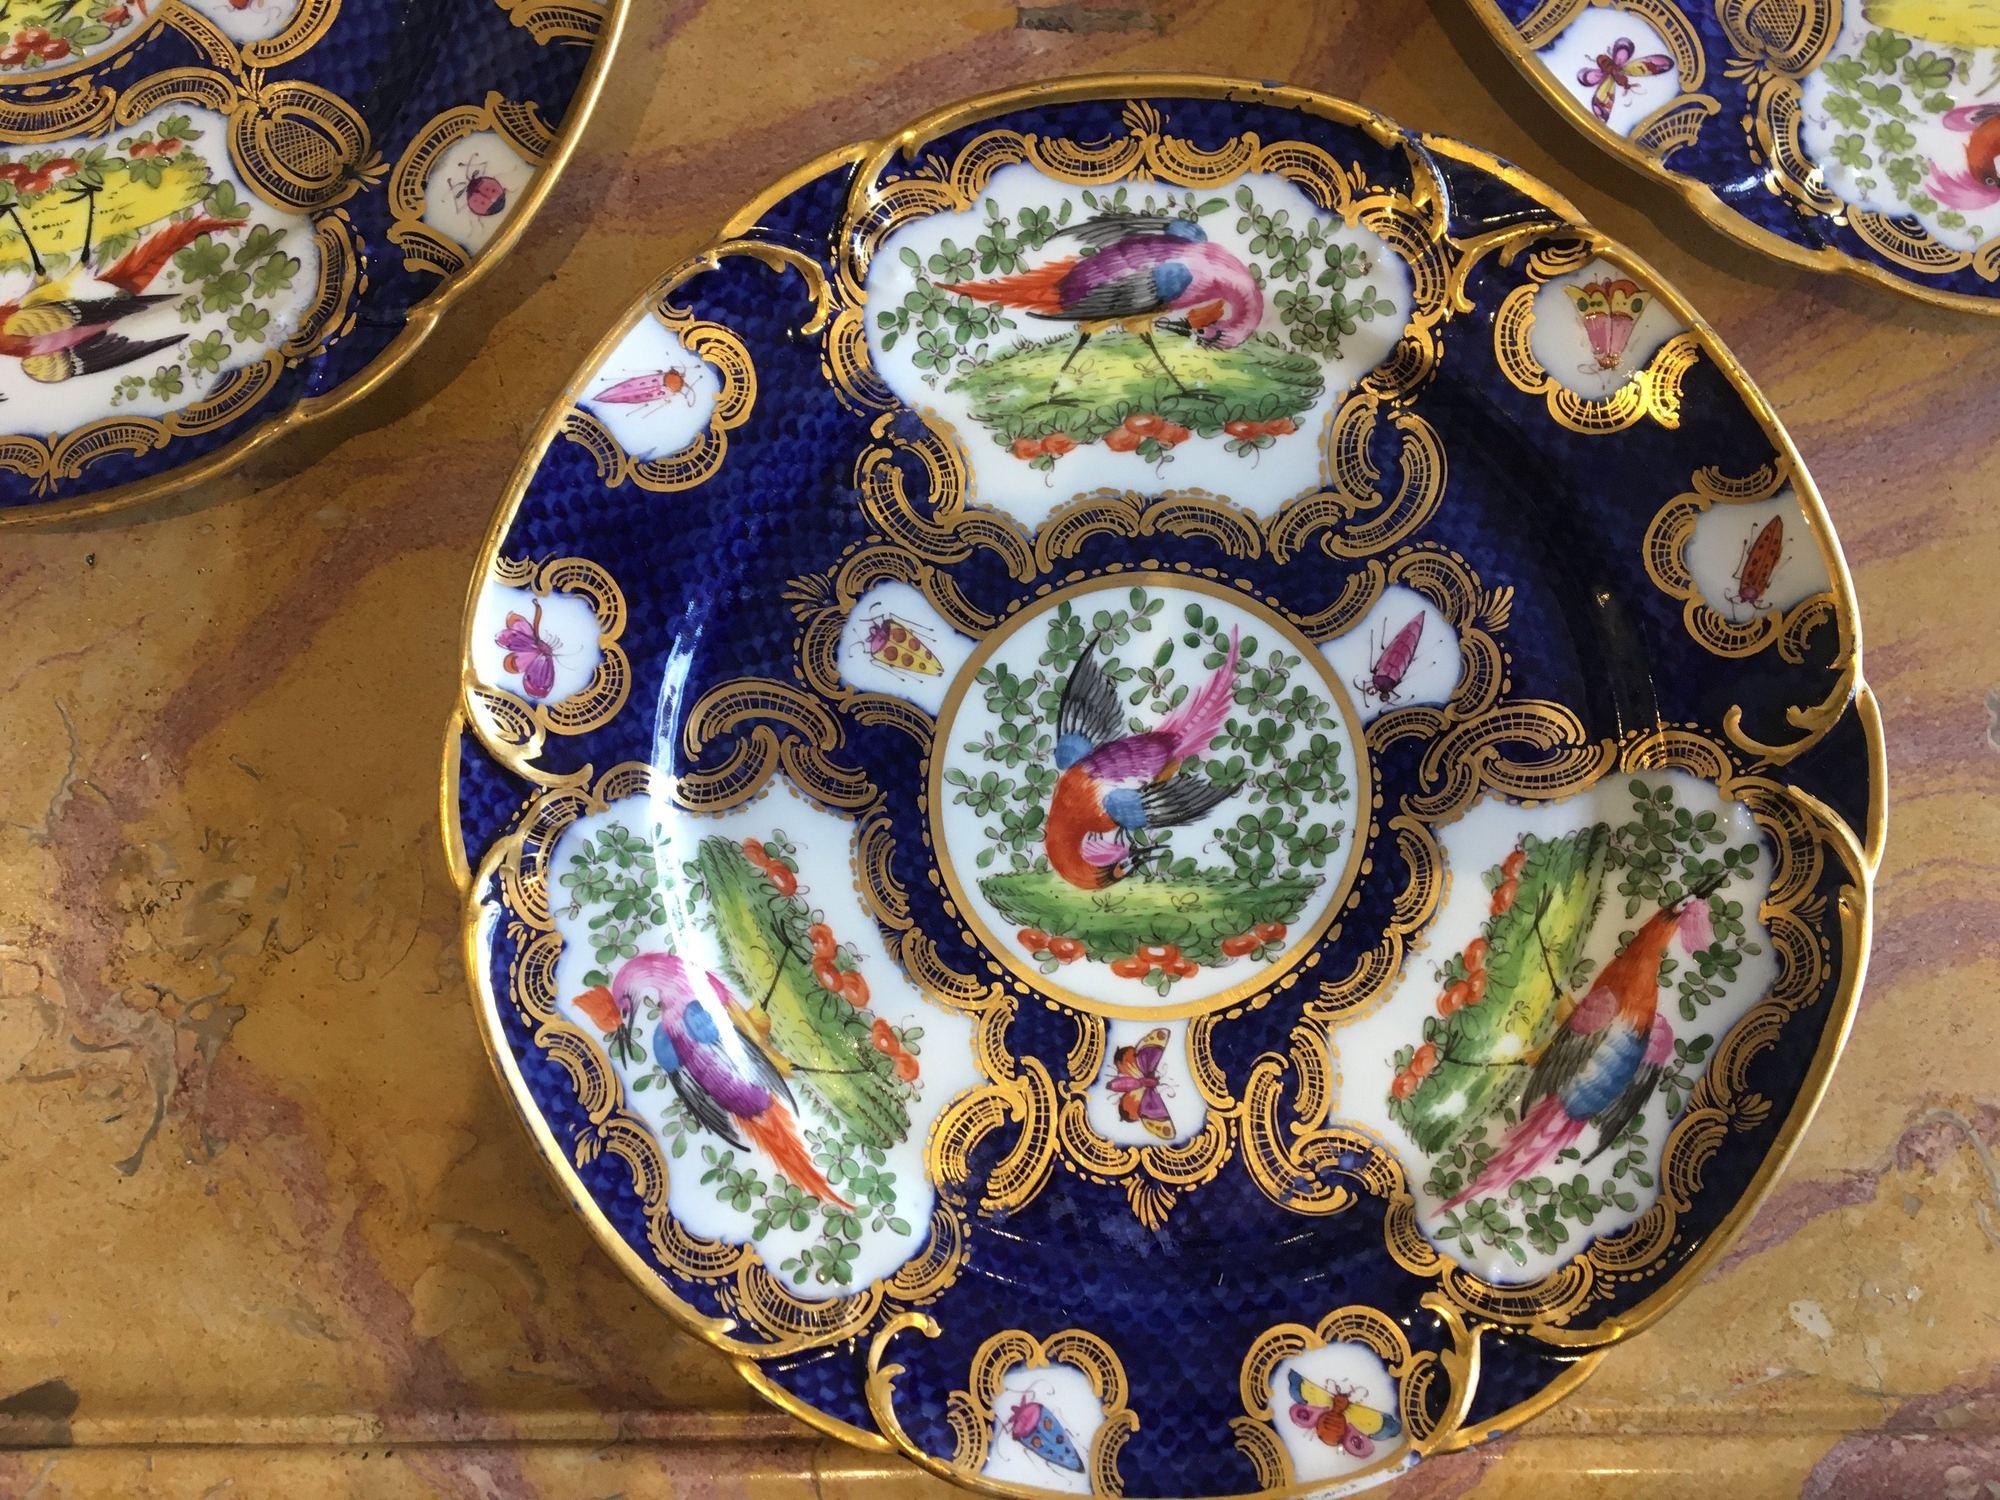 George III Chelsea Porcelain Cabinet Plates, Mid-18th Century